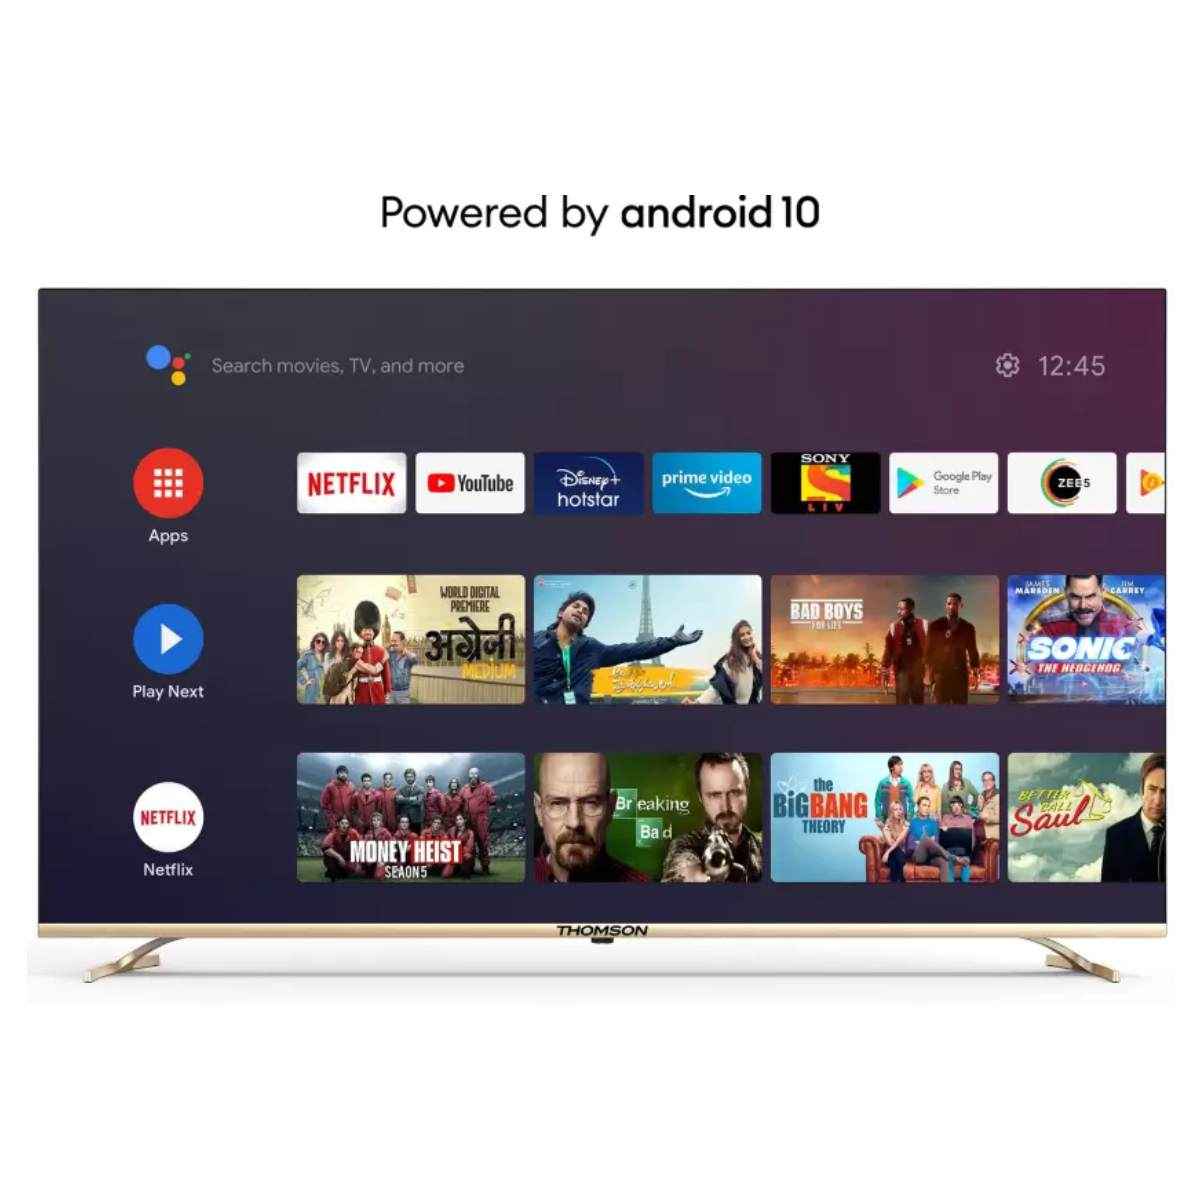 Thomson 43 inch 4K LED Smart Android TV (43 OATHPRO 2000)